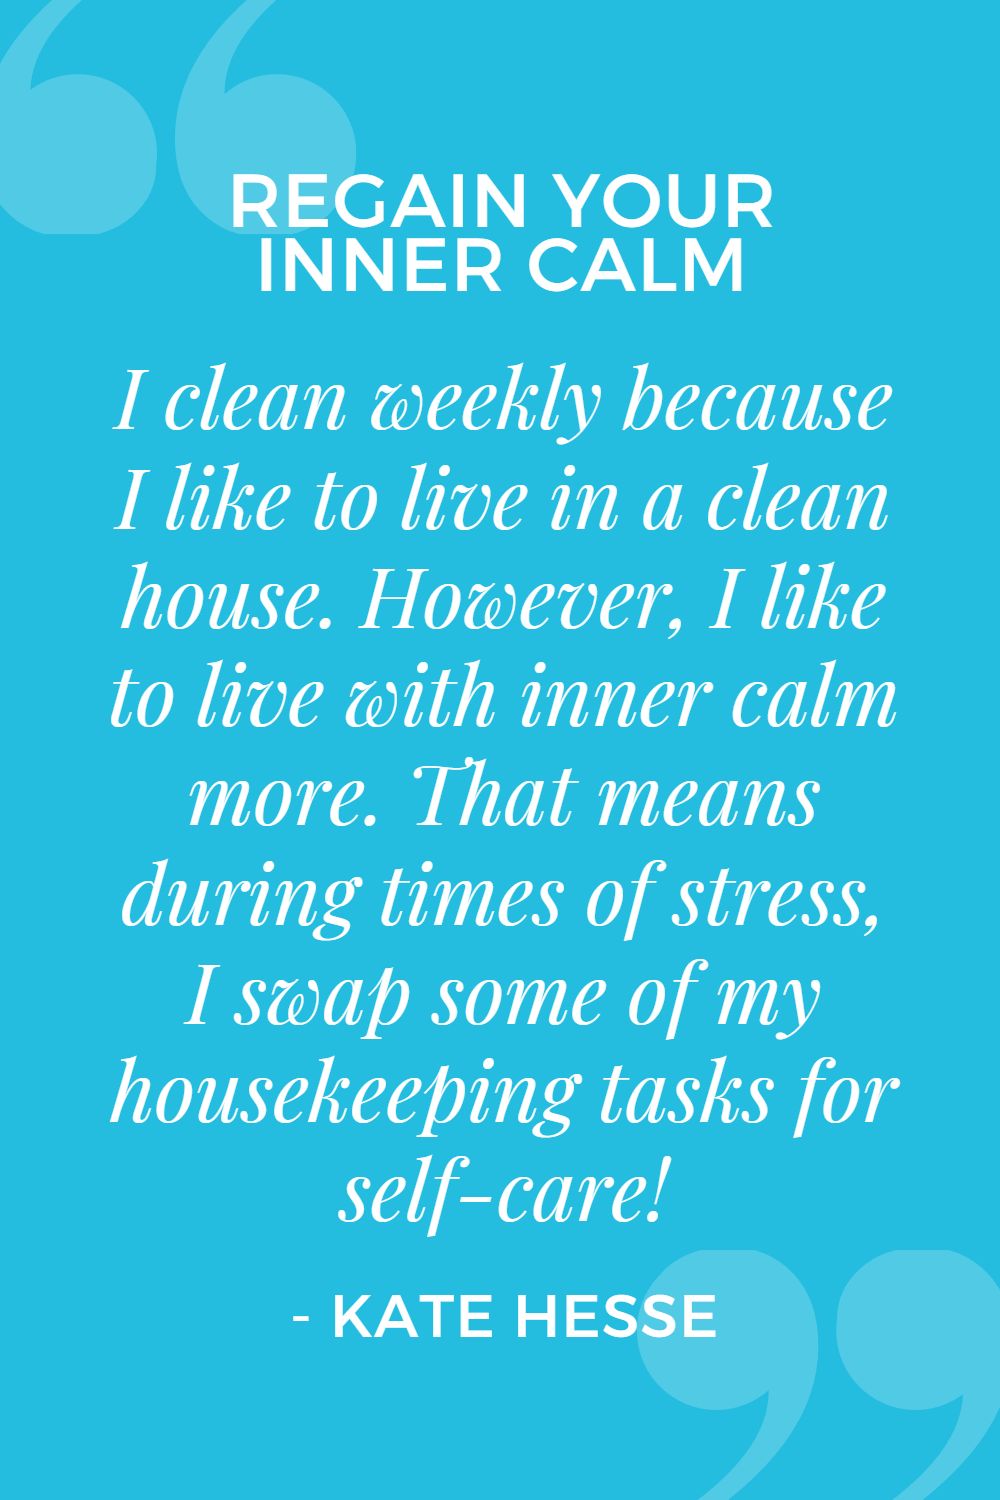 I clean weekly because I like to live in a clean house. However, I like to live with inner calm more. That means during times of stress, I swap some of my housekeeping tasks for self-care!